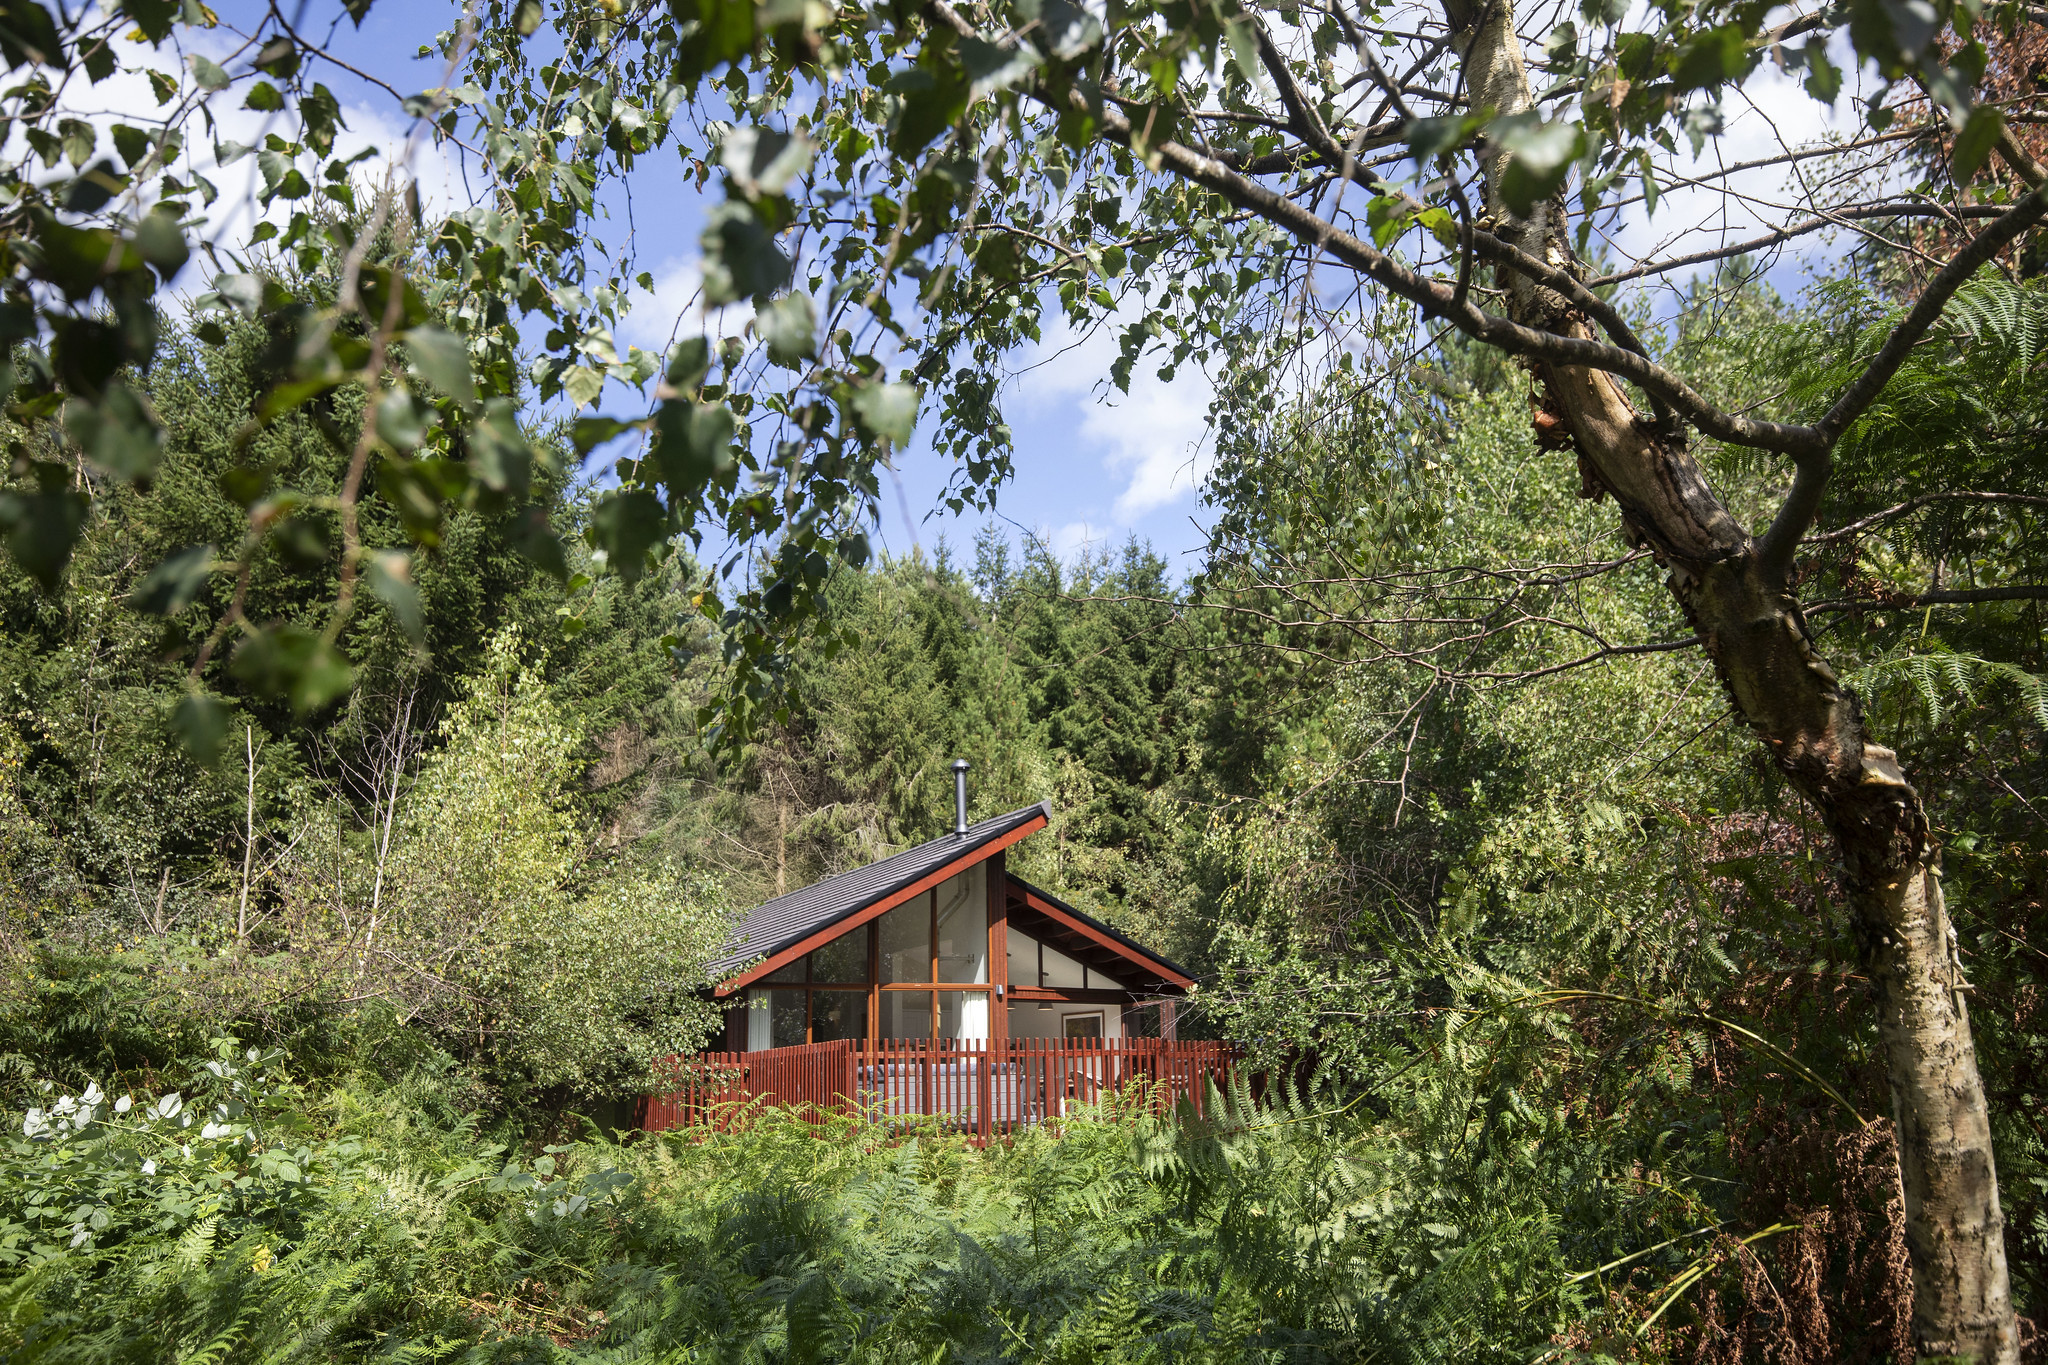 The White Willow Premium Cabin at Delamere Forest by Forest Holidays.